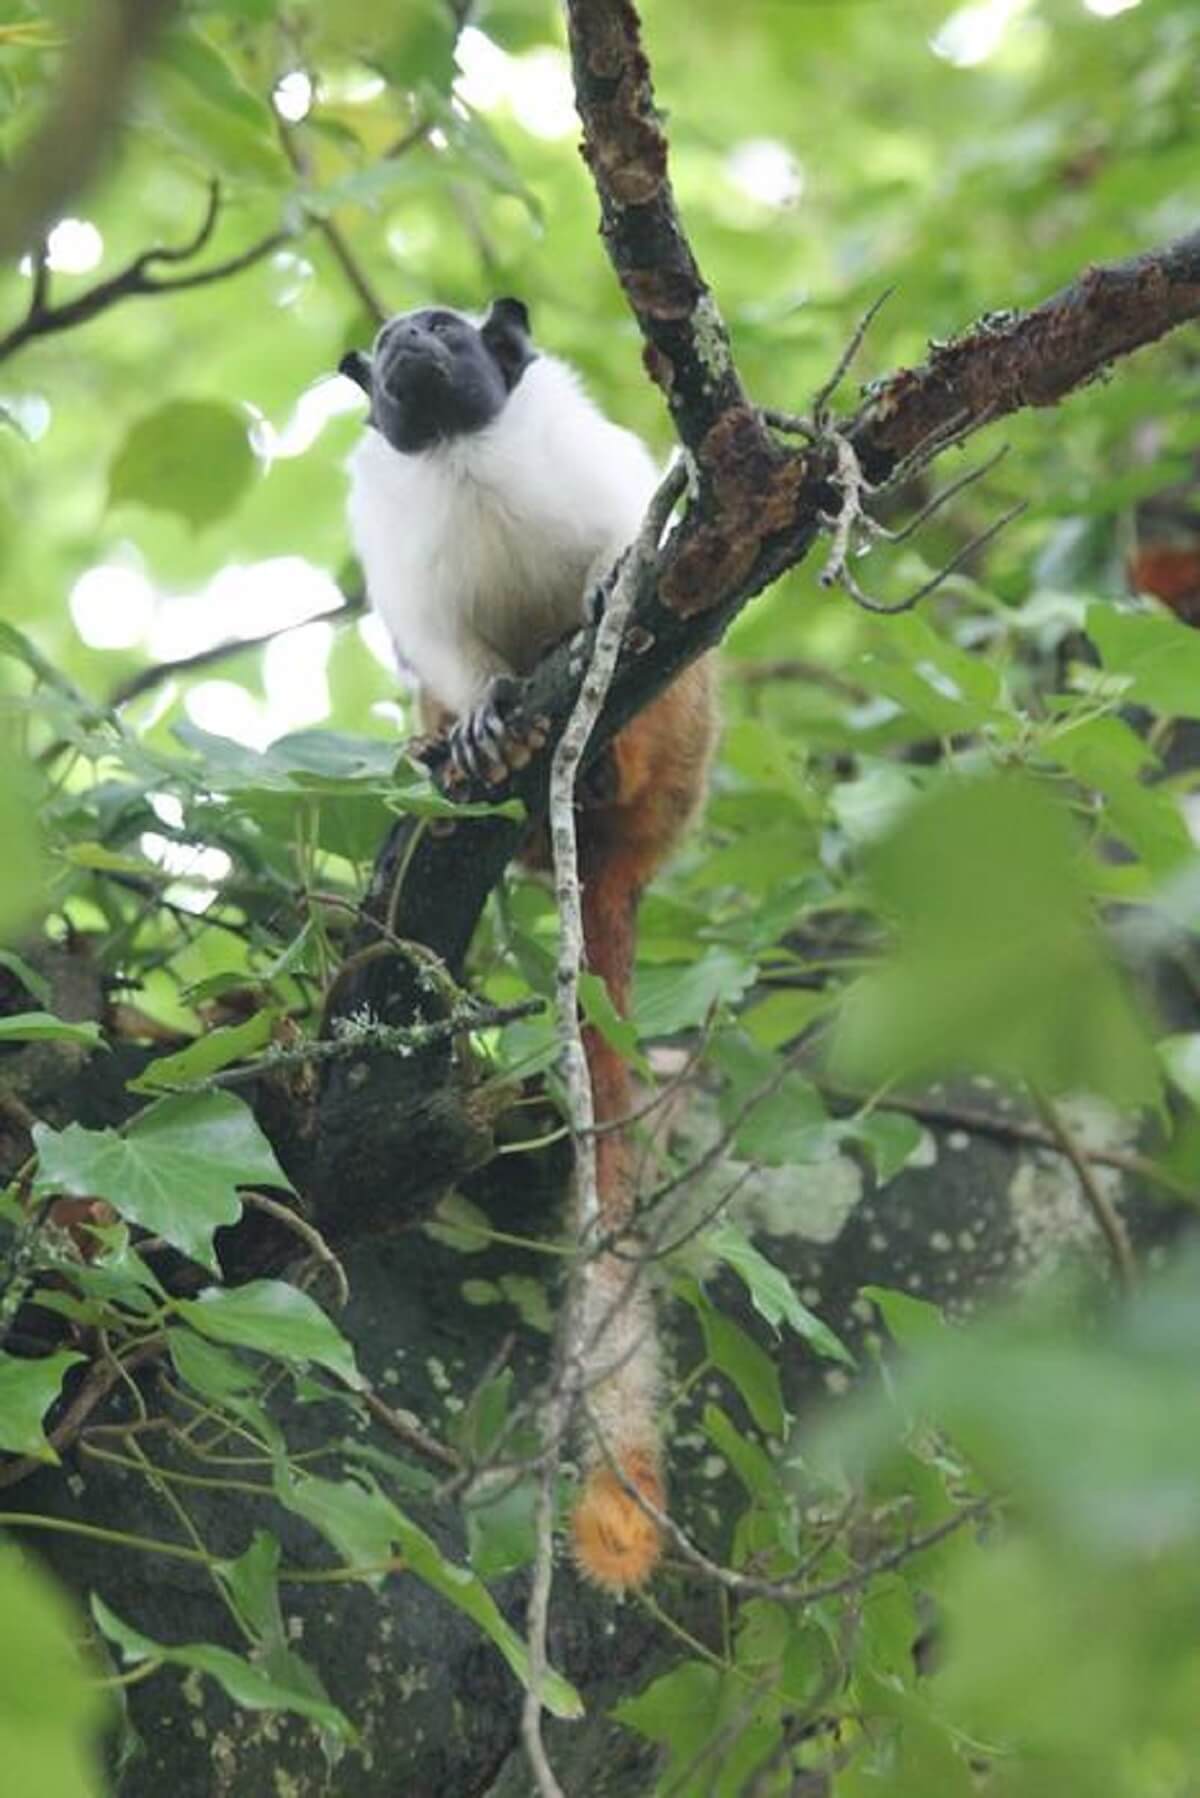 Black and white tamarin monkey perched on top a branch surrounding by green leaves